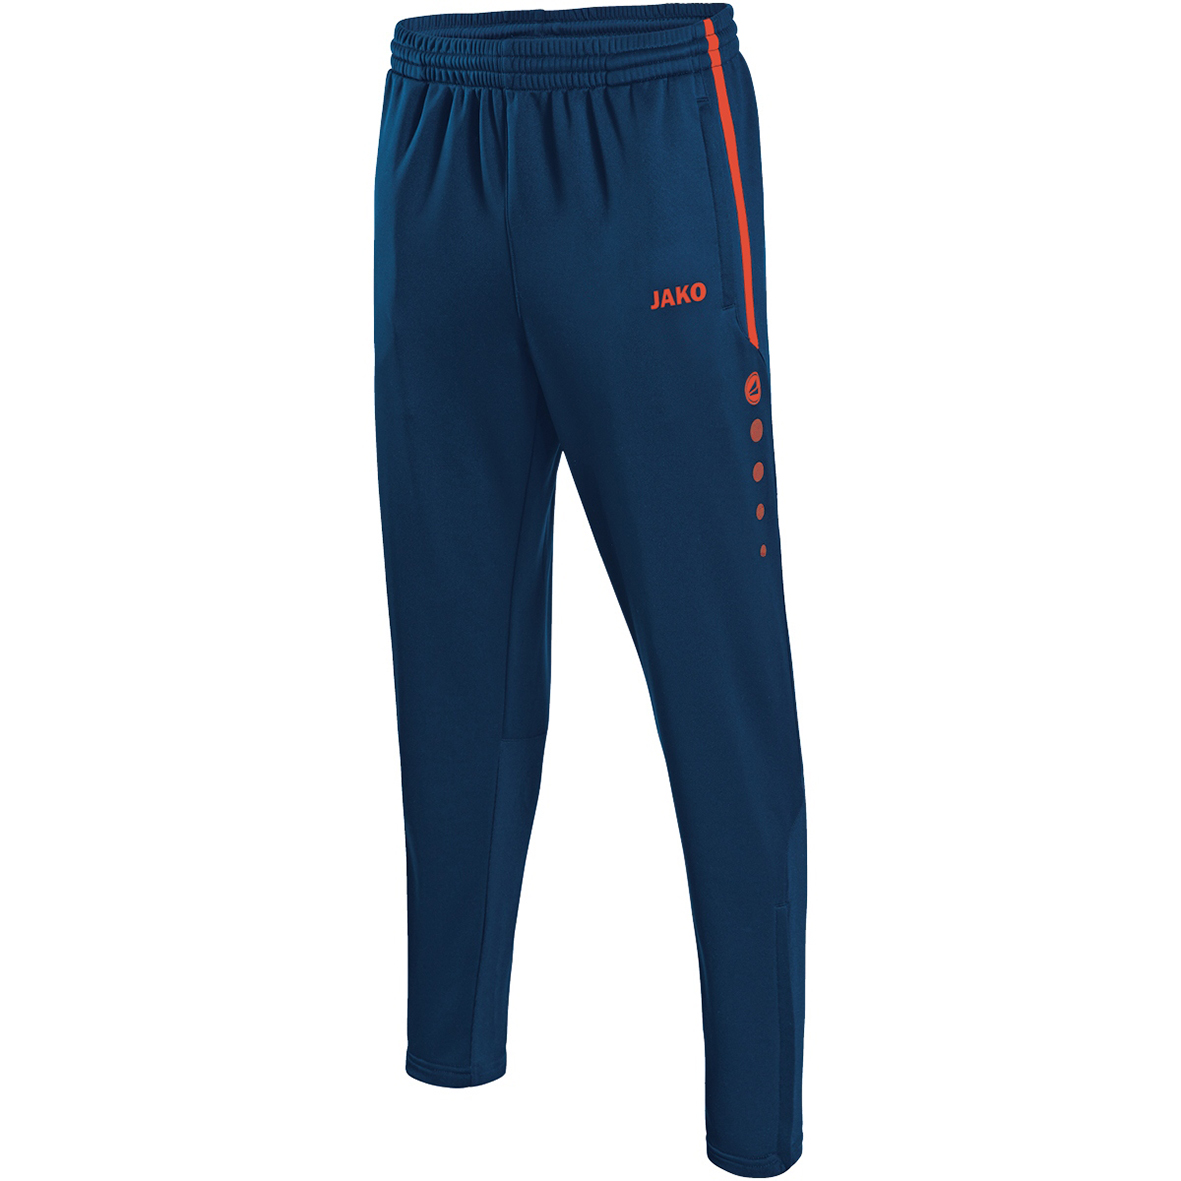 JAKO TRAINING TROUSERS ACTIVE NAVY-FLAME KIDS.